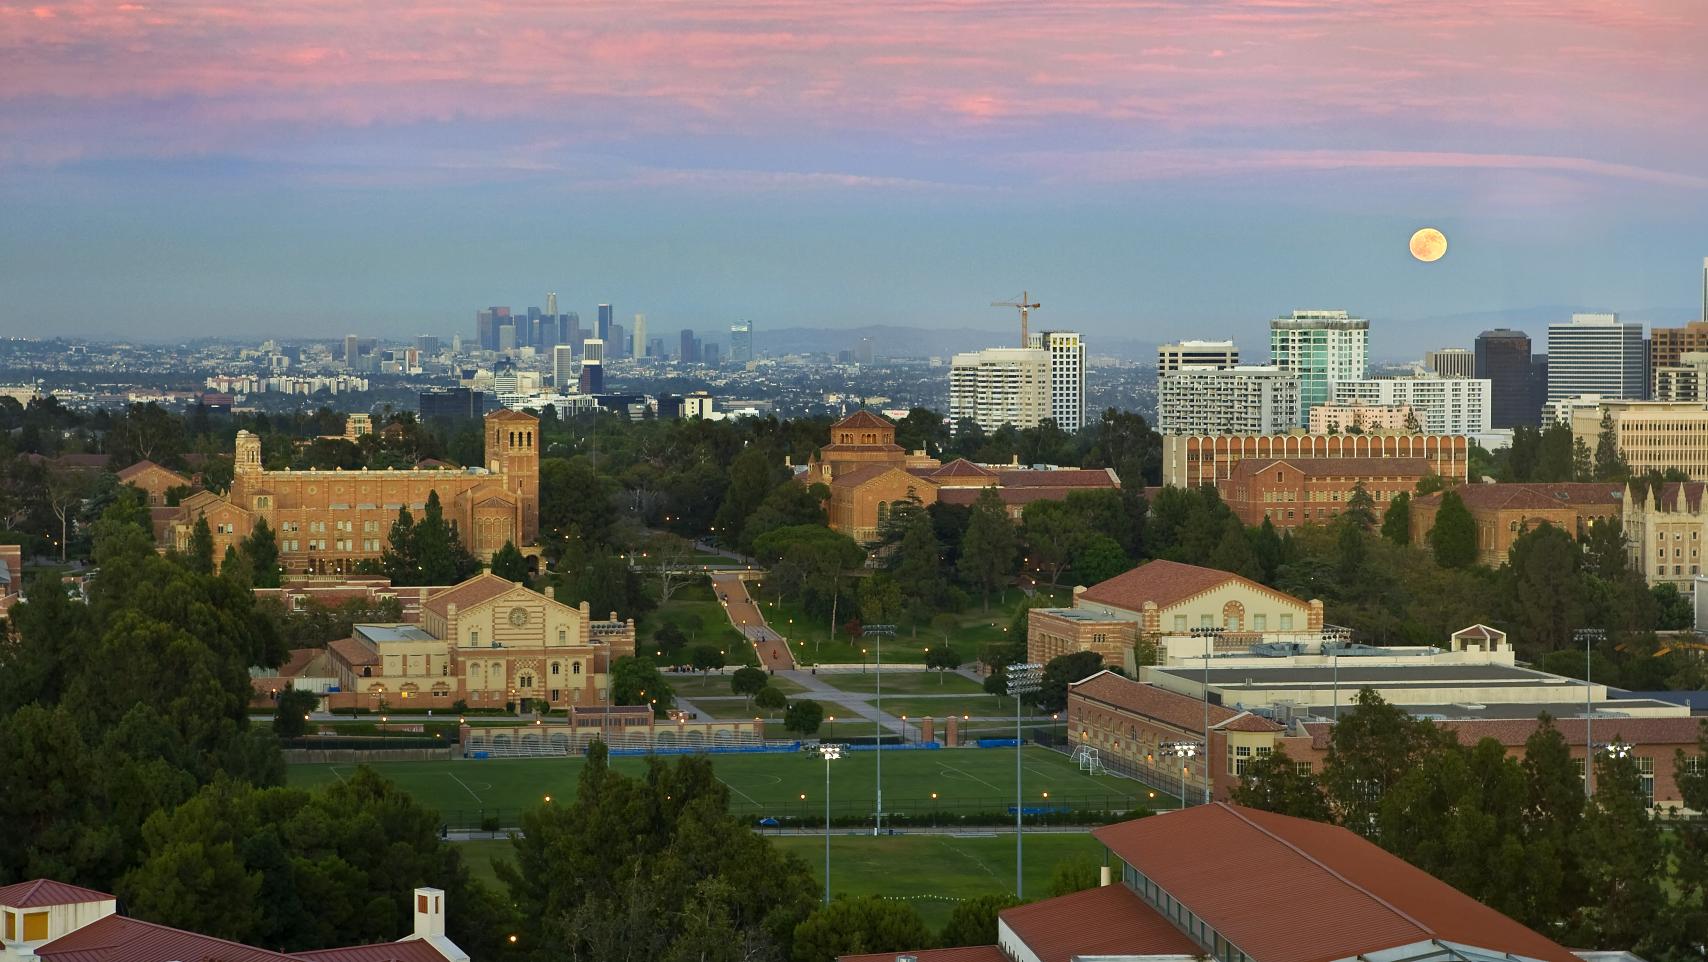 An aerial view of UCLA campus underneath a sunset and full moon.